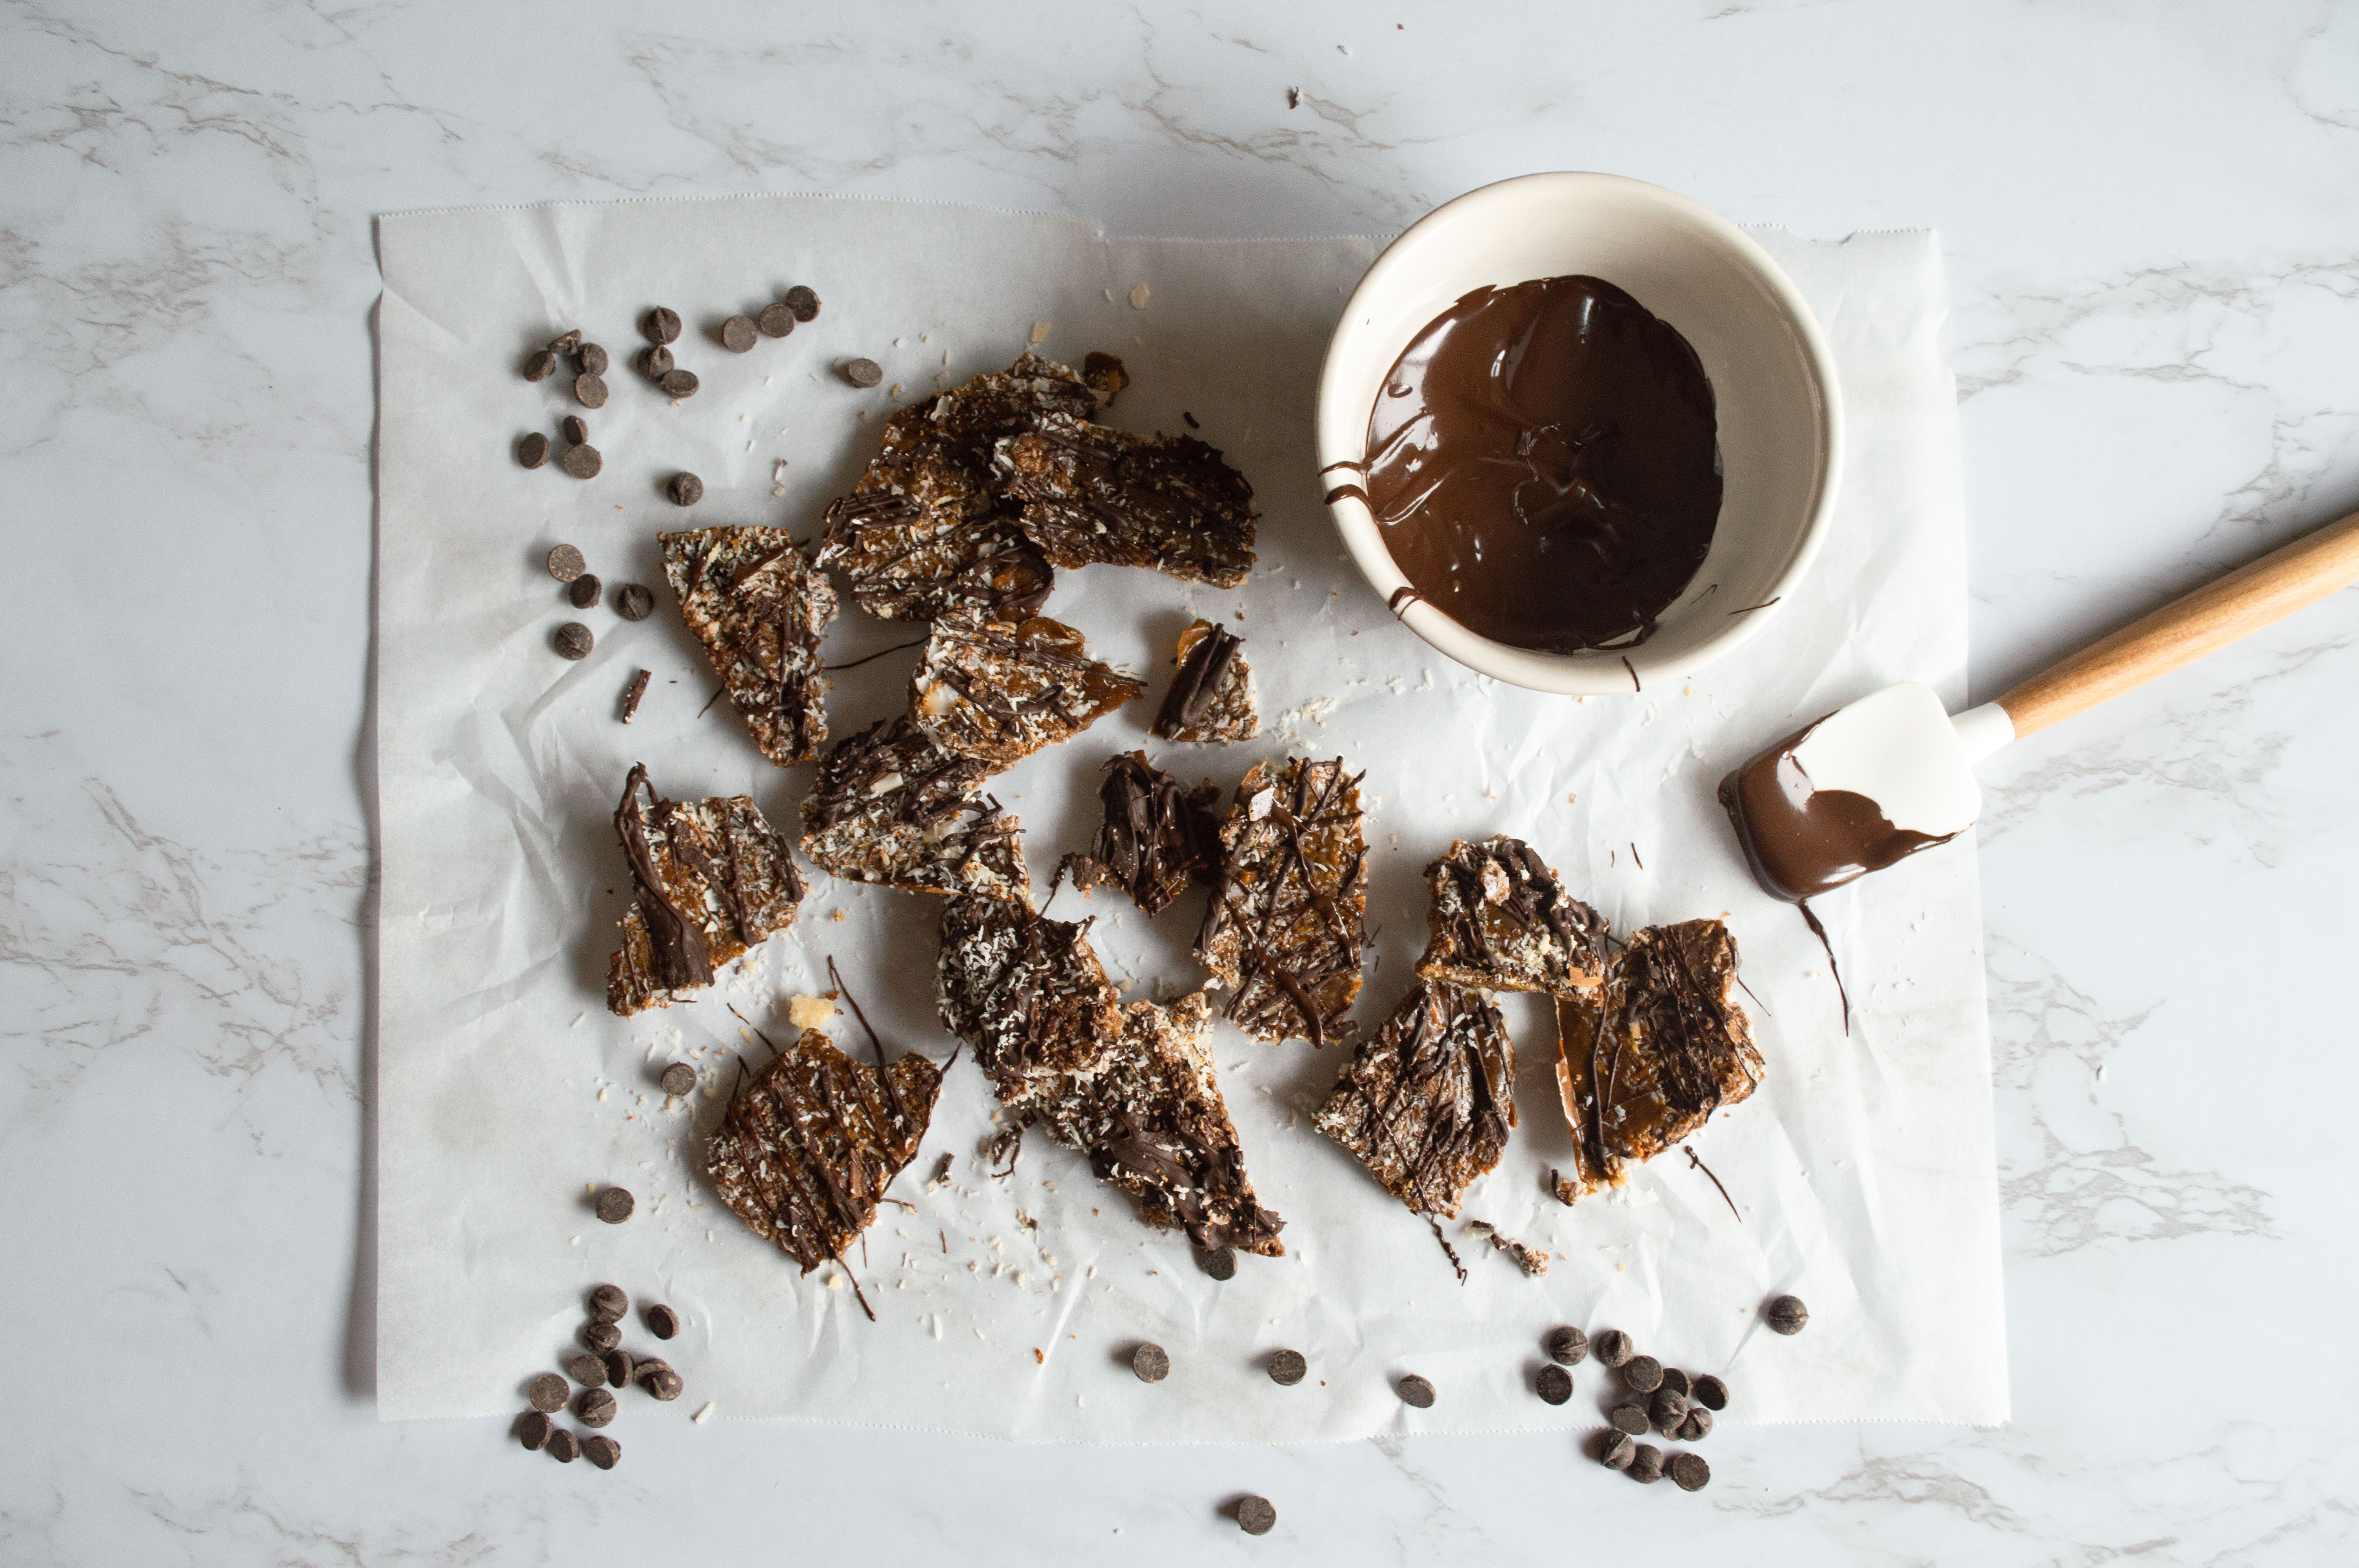 On a white marble countertop, there is a rectangular piece of parchment paper. On top of it, there are pieces of Samoas Vegan Toffee. There are chocolate chips, pieces of coconut and in the upper righthand corner, a small white bowl of melted chocolate and a small spatula lying on the parchment paper with melty chocolate on the tip.